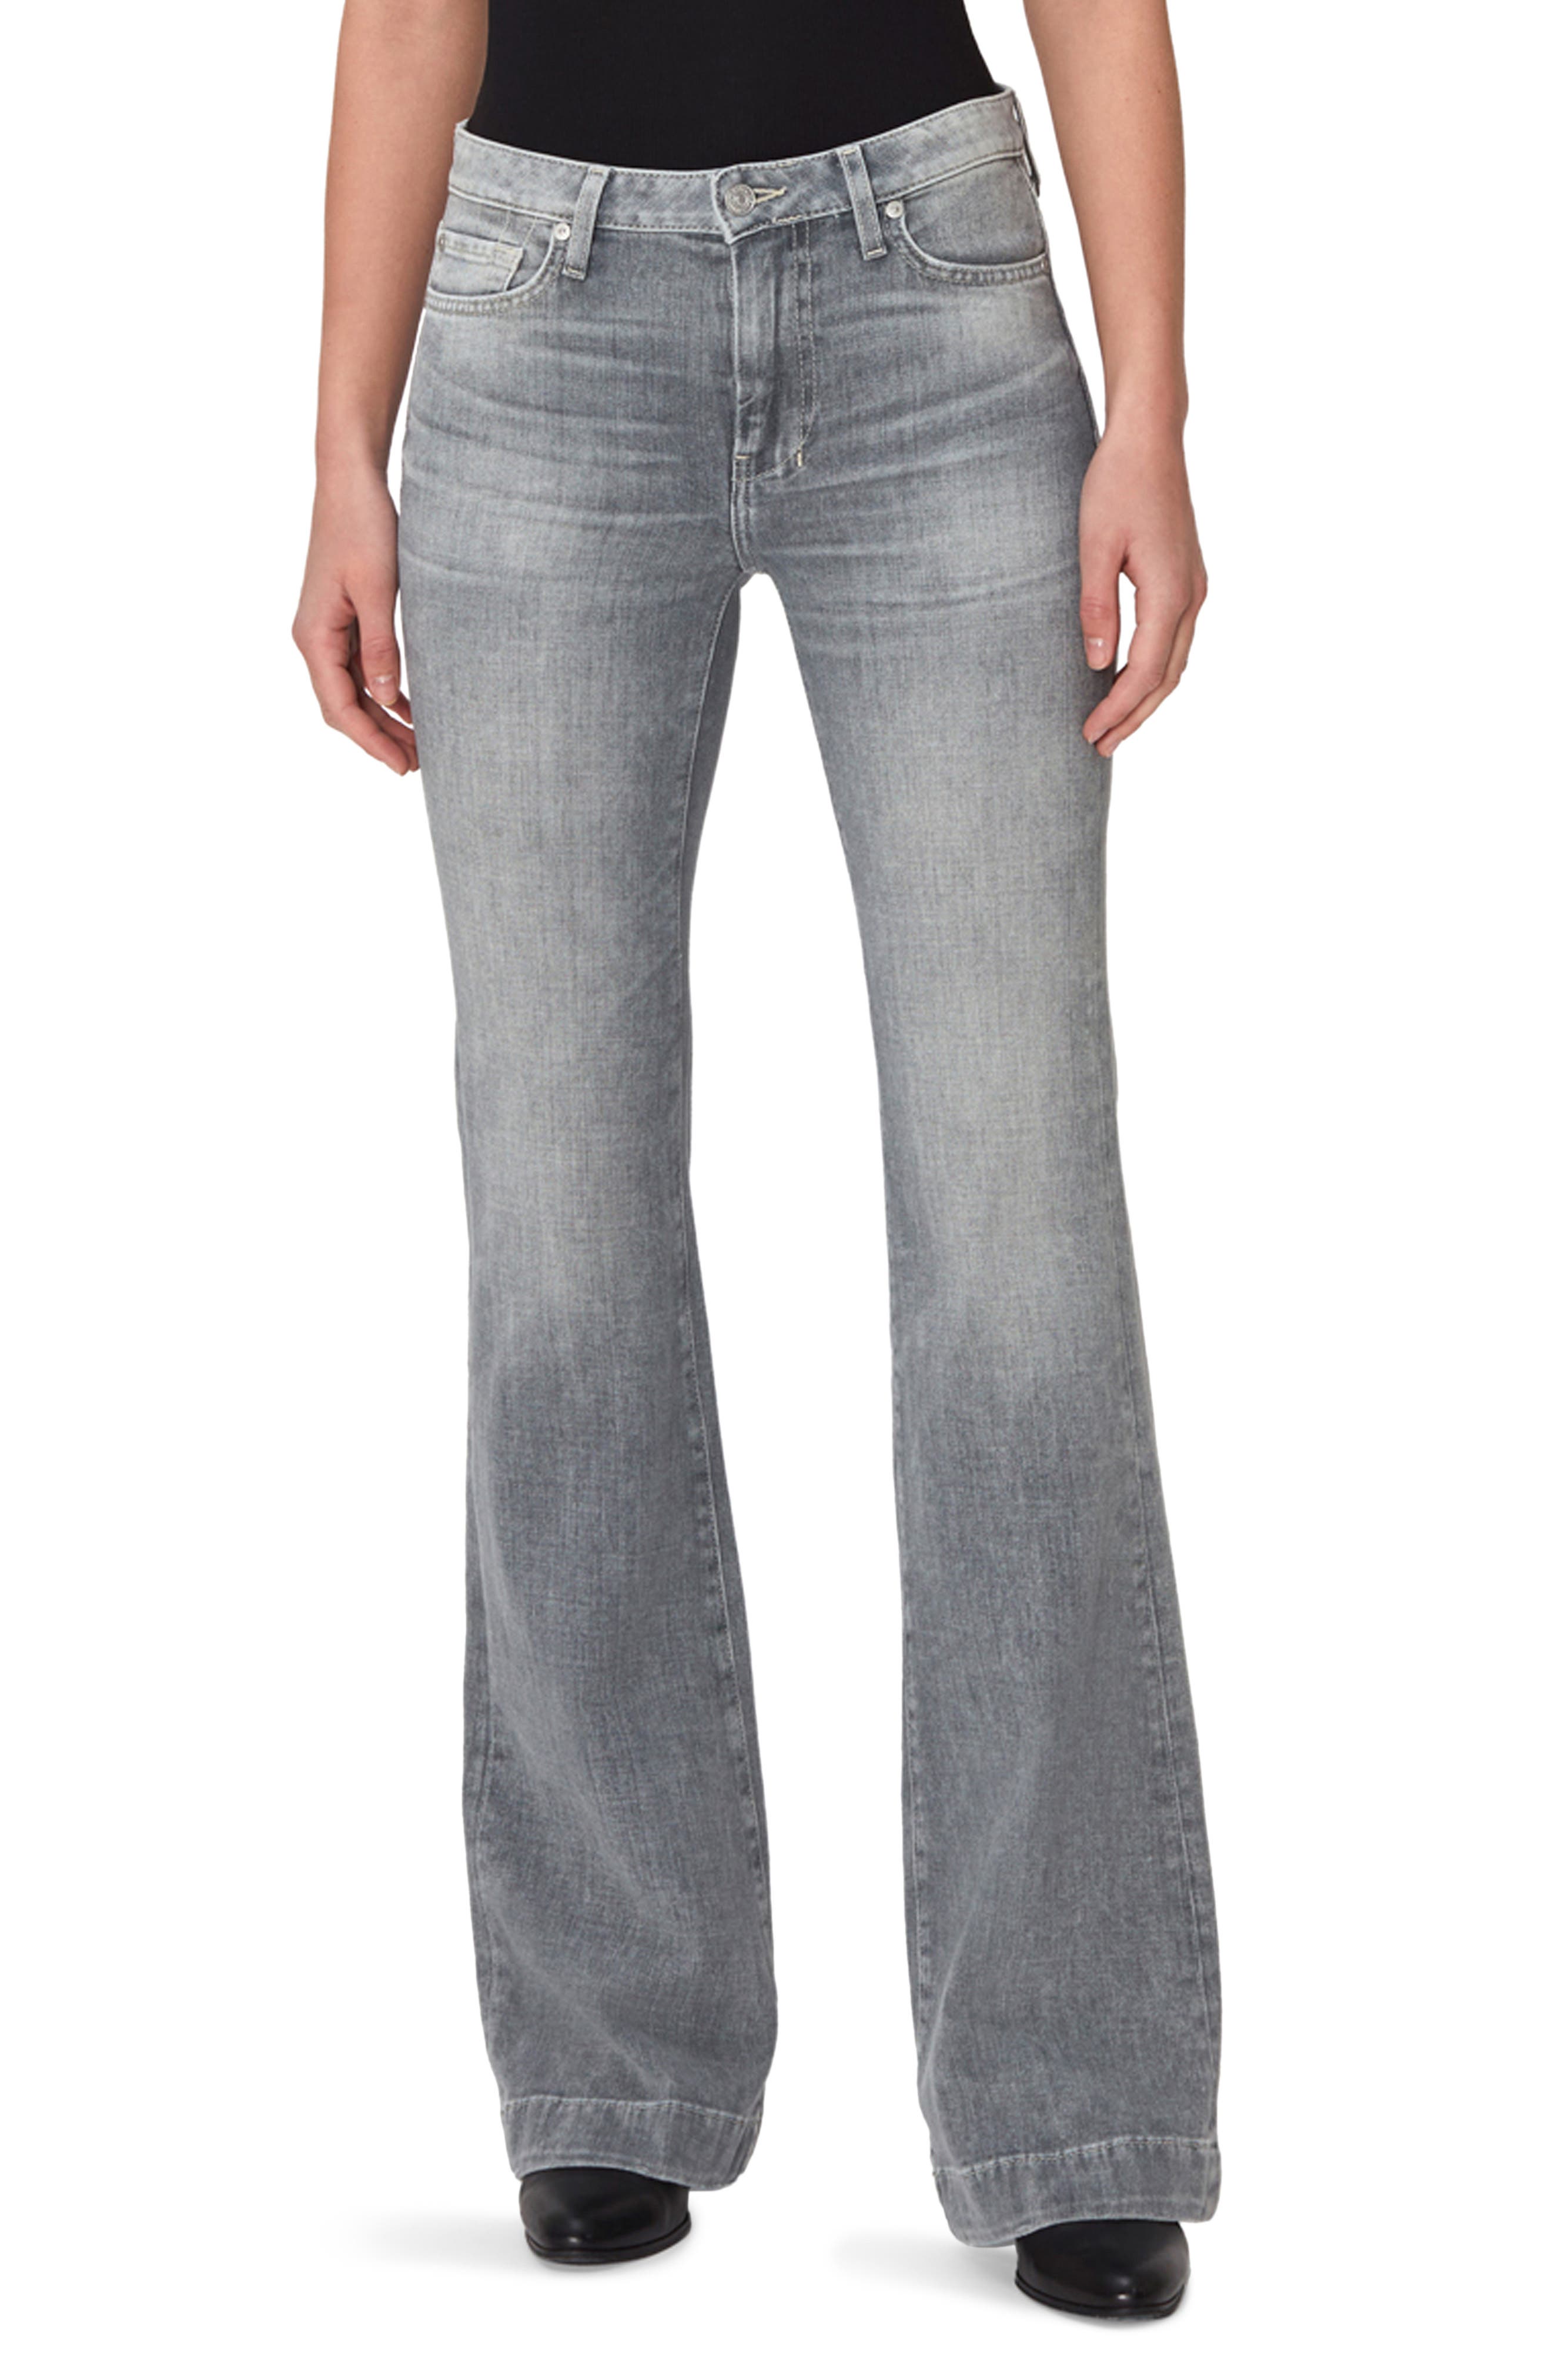 Denim Couture Bootcut Jeans Gray Spade 